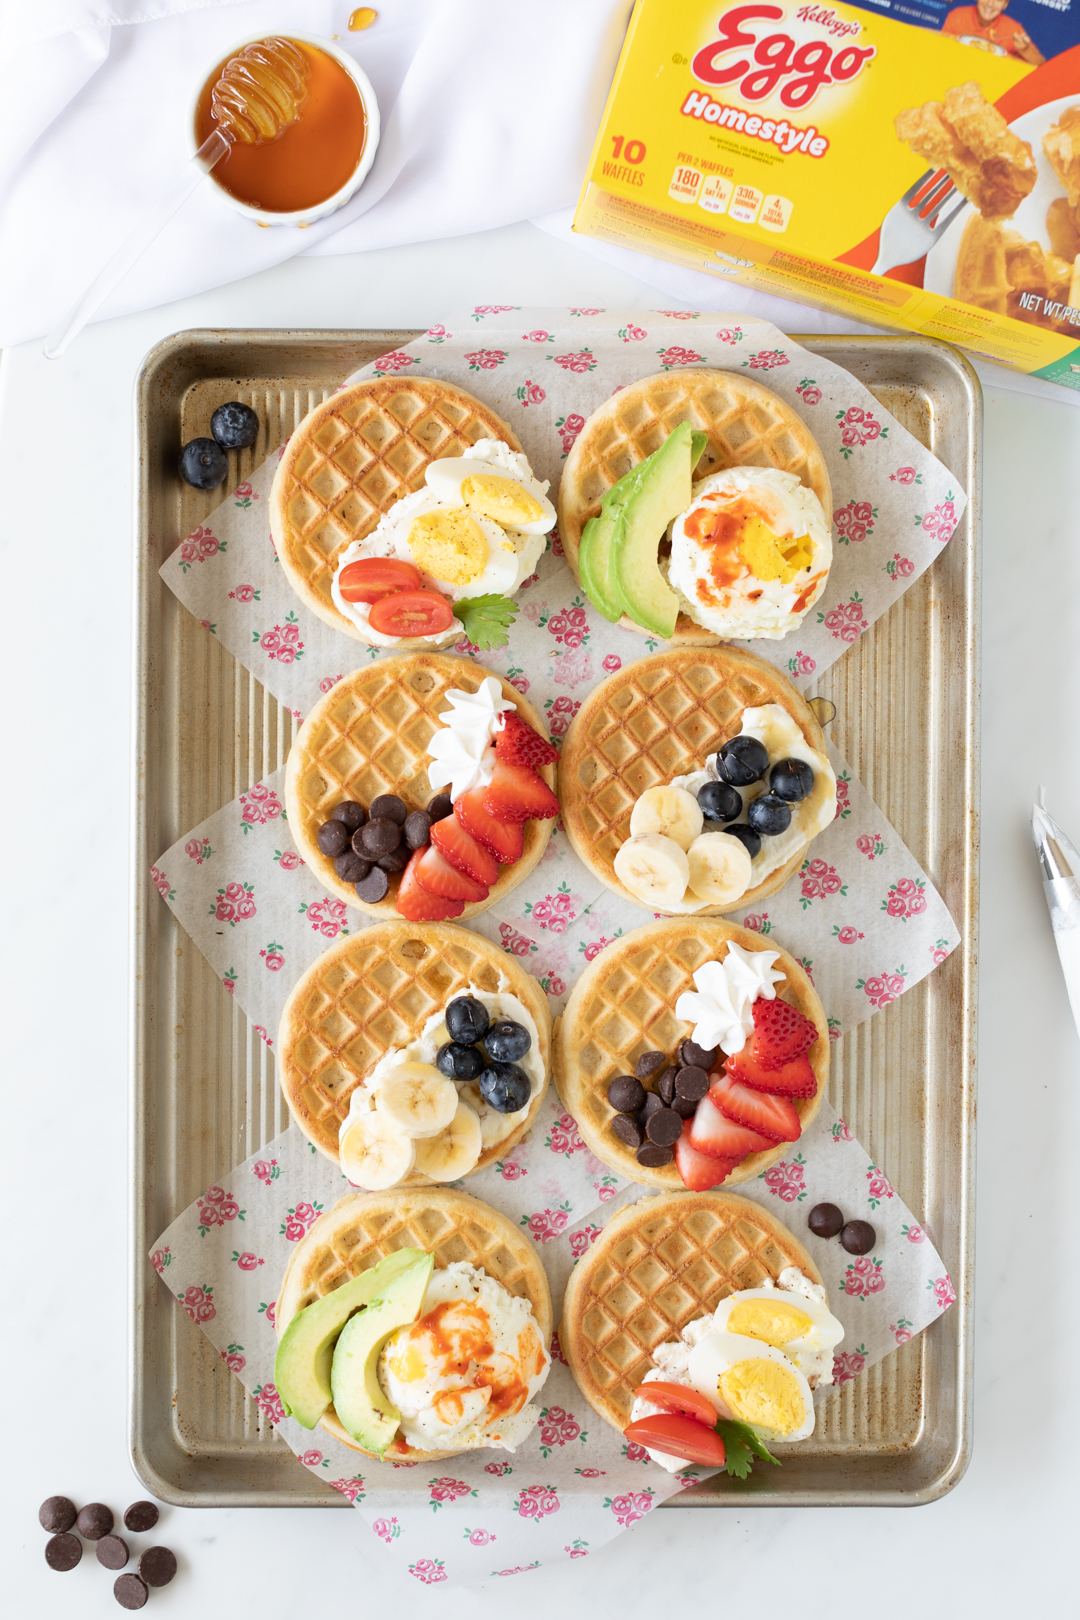 eggo waffles with a variety of sweet and savory toppings